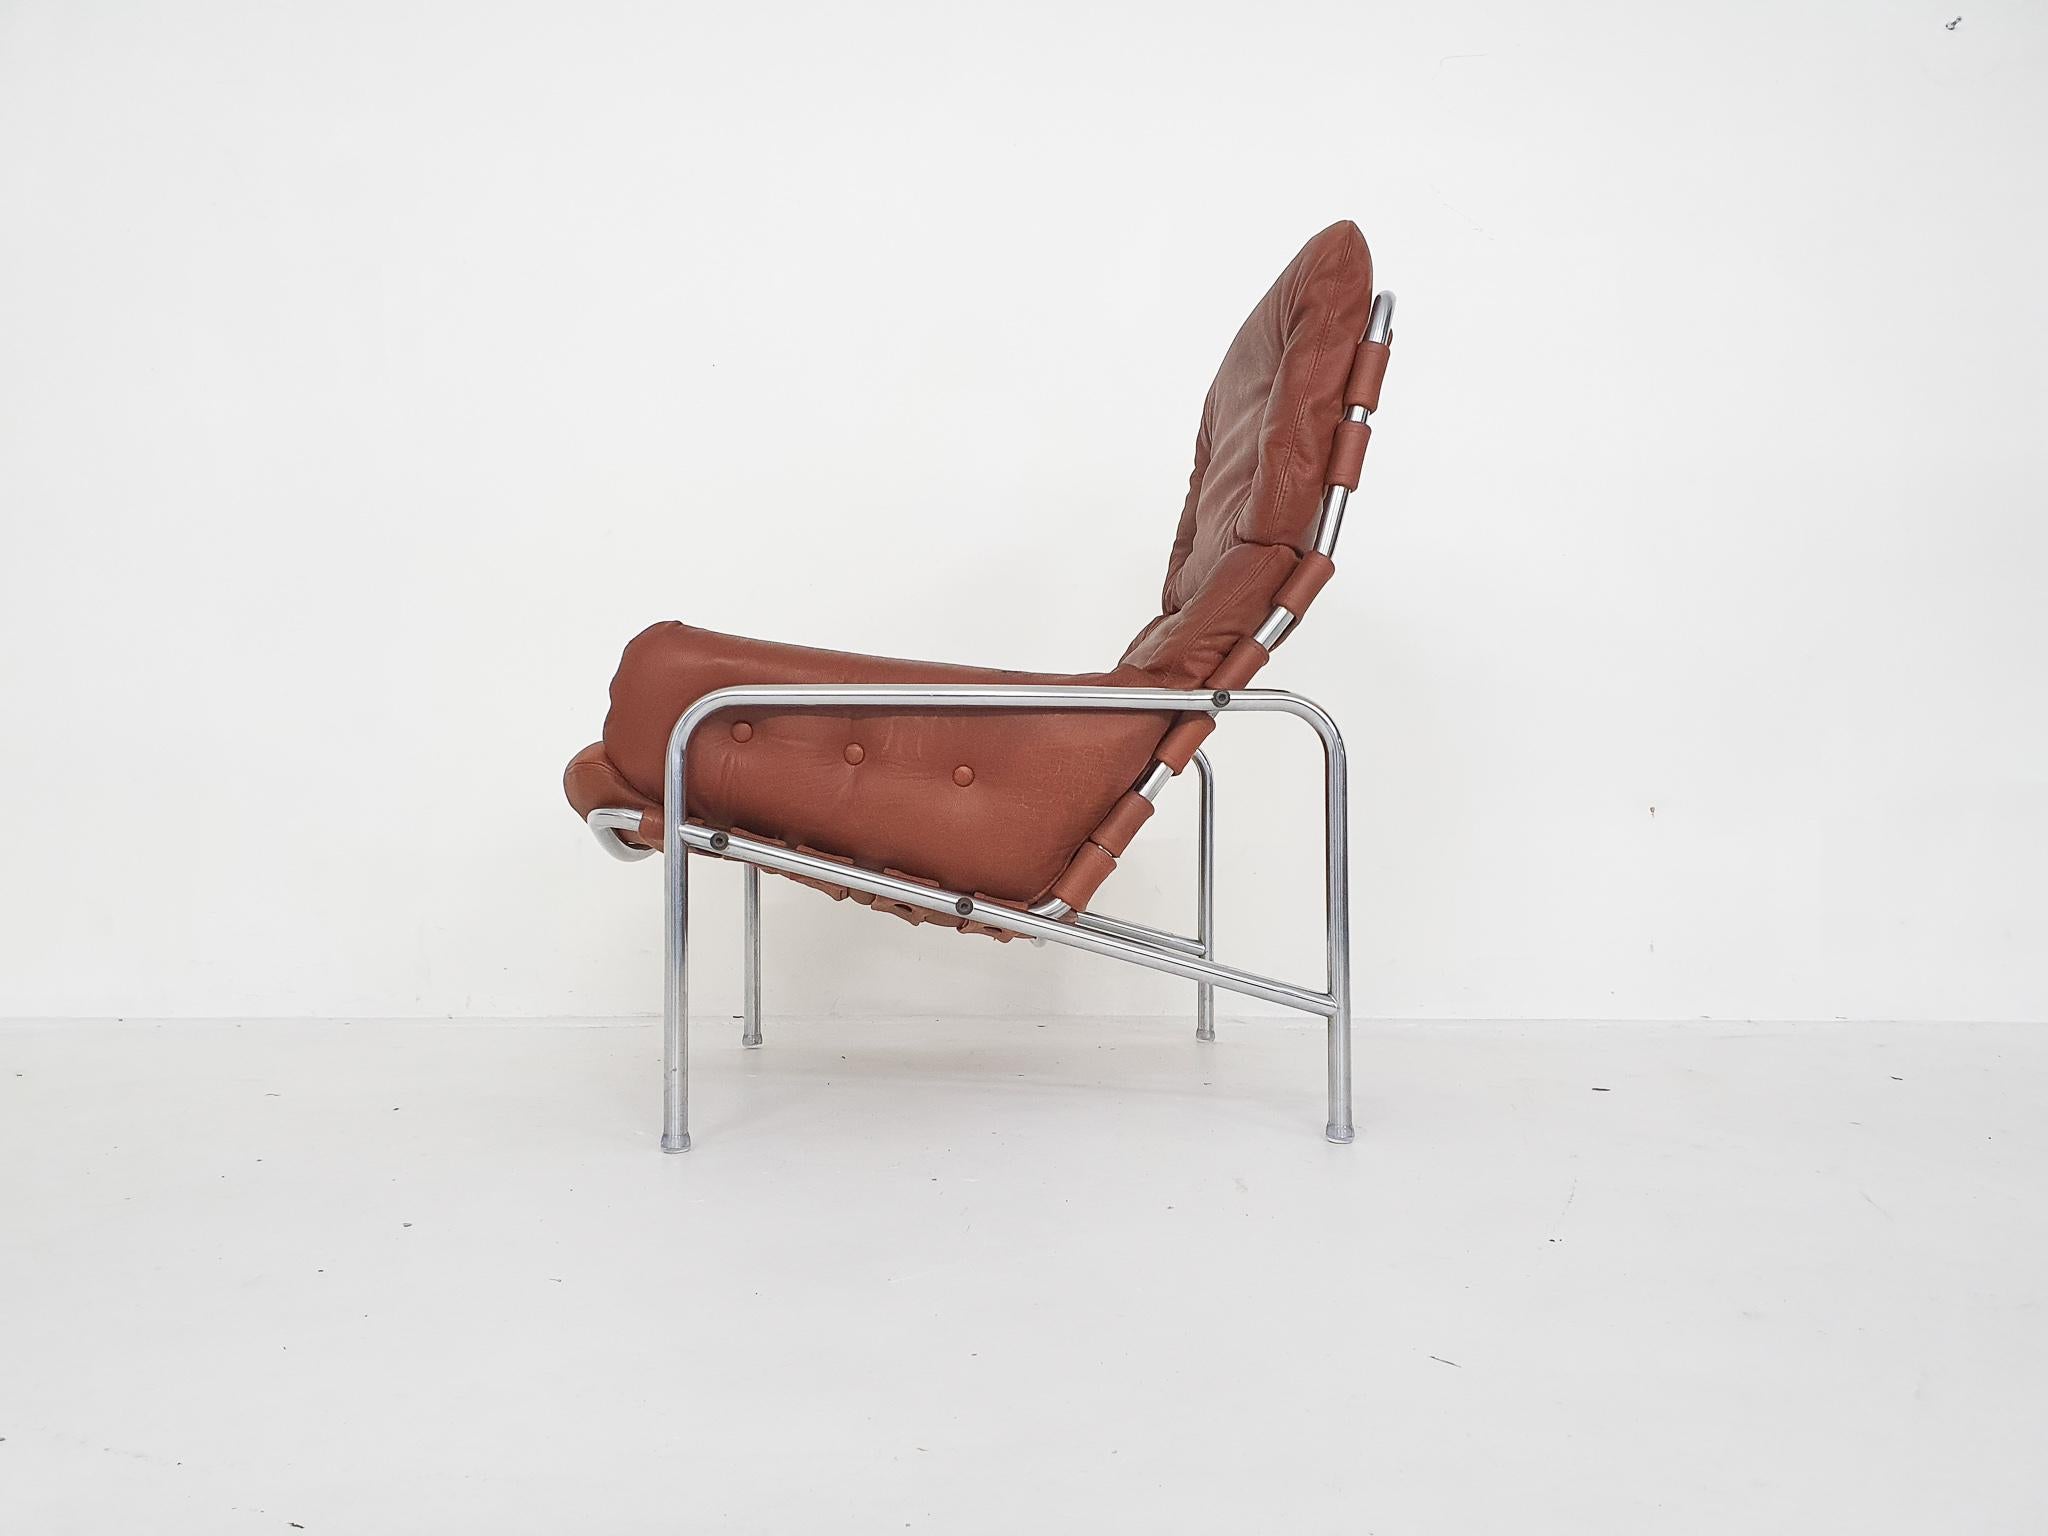 Dutch “Nagoya” Leather Lounge Chair by Martin Visser for ’t Spectrum, 1969